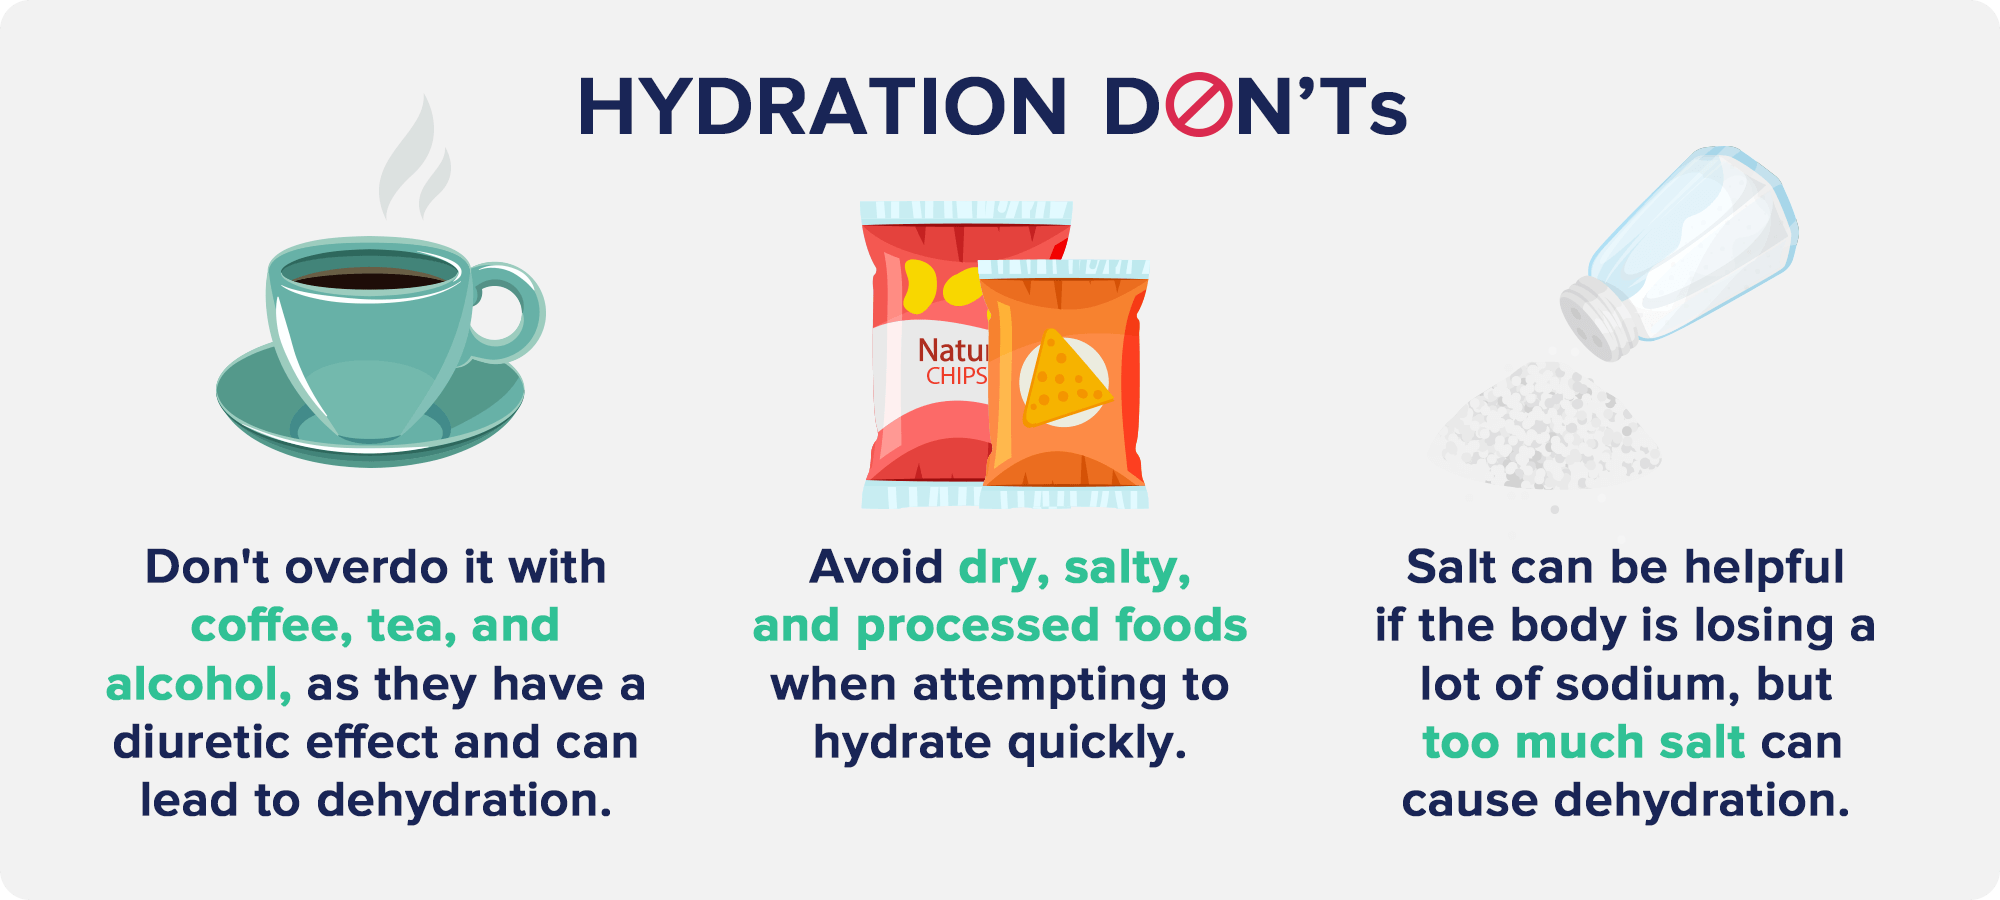 more hydration don'ts